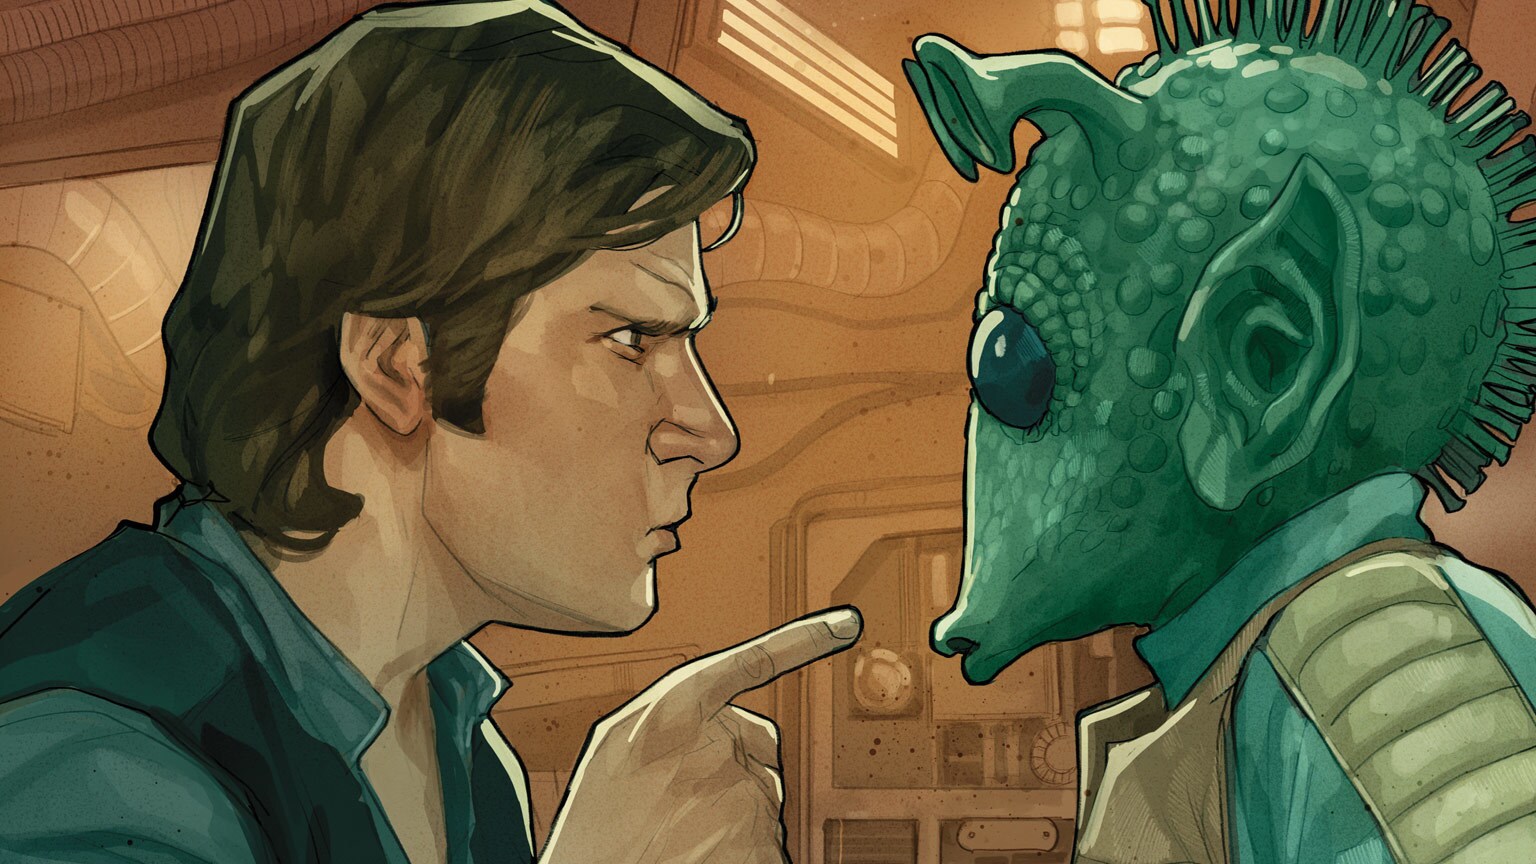 Meet Han Solo’s Father in Marvel’s Star Wars: Han Solo & Chewbacca #2 – Exclusive Preview